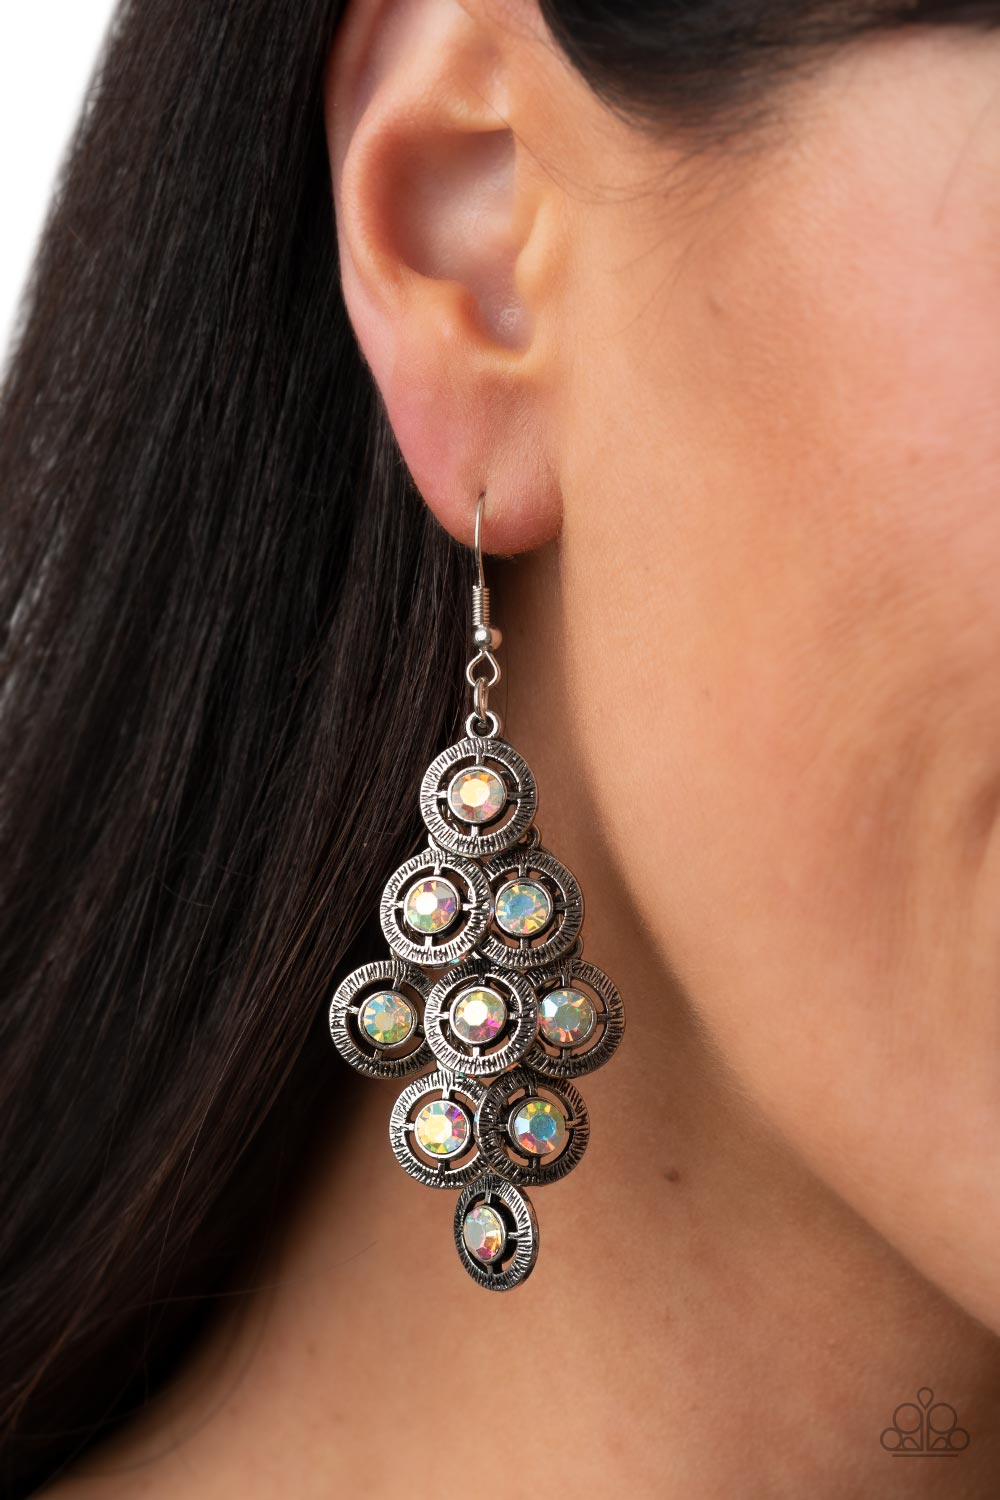 Constellation Cruise Multi Iridescent Rhinestone Earrings - Paparazzi Accessories-on model - CarasShop.com - $5 Jewelry by Cara Jewels